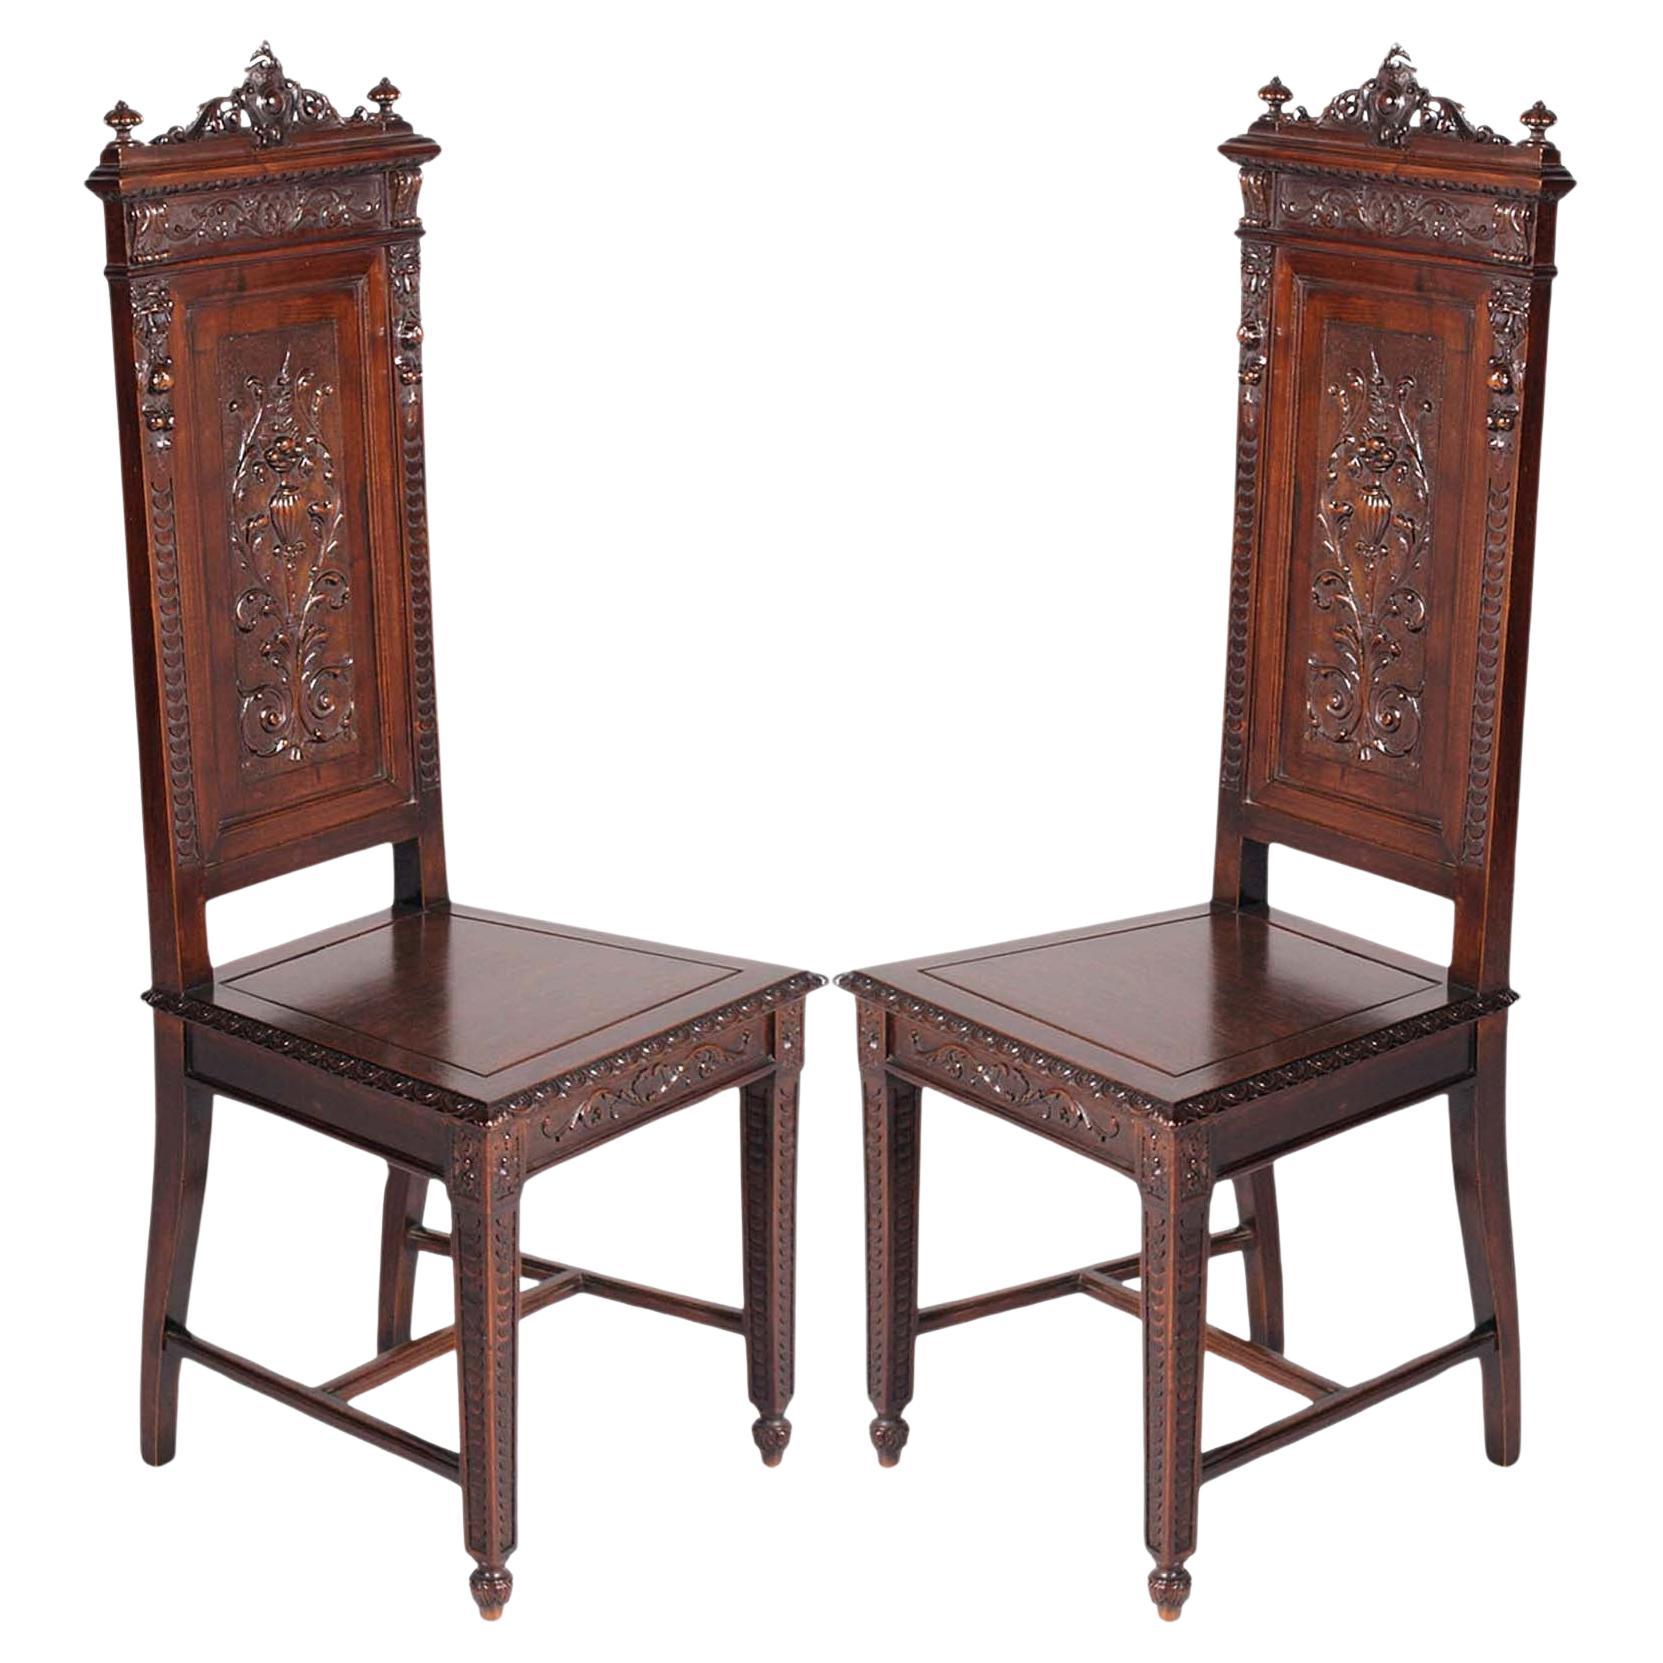 Early 20th Century Pair Eclectic Venice Chairs in Walnut by Testolini Frères